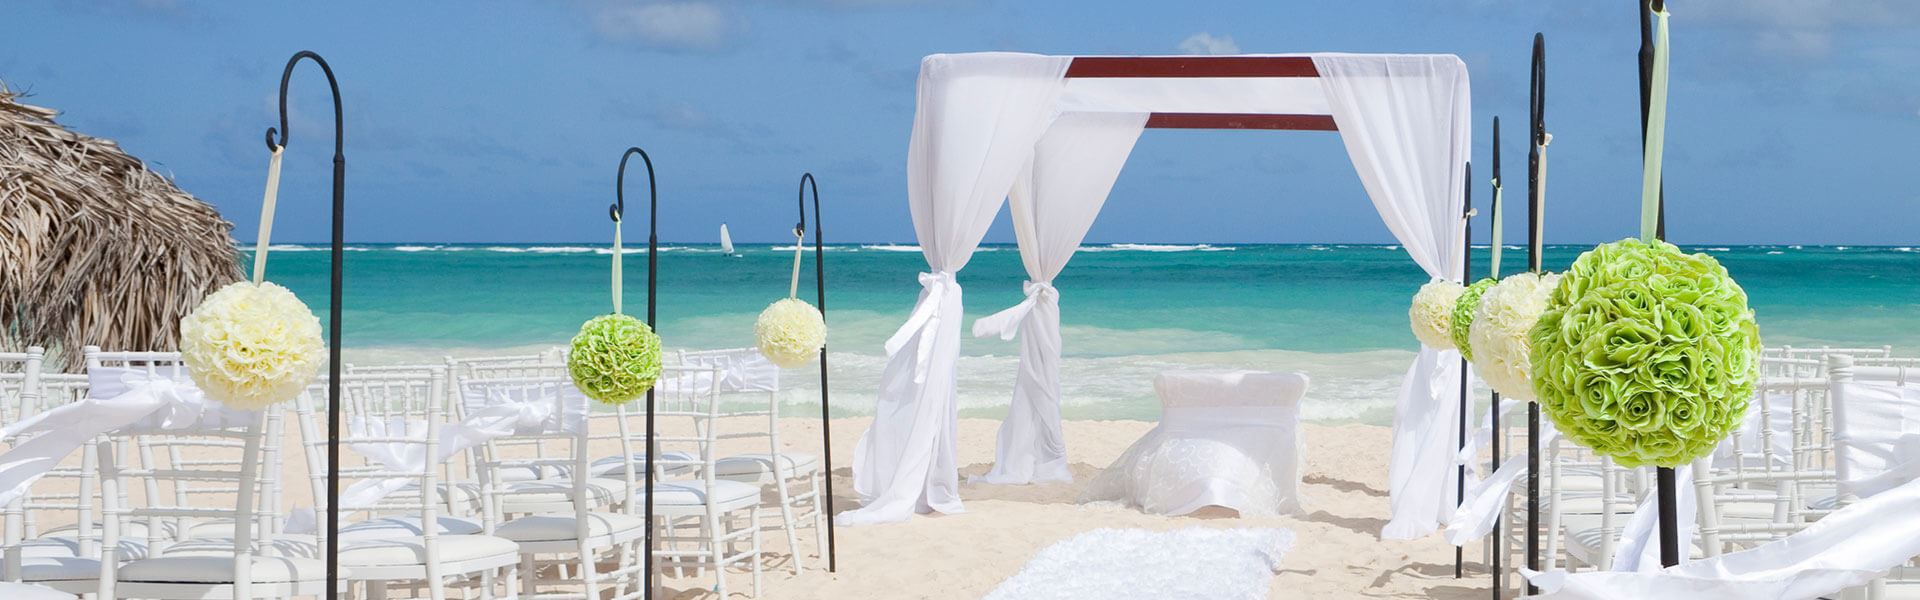 bright wedding venue altar with white curtains right on the ocean sand